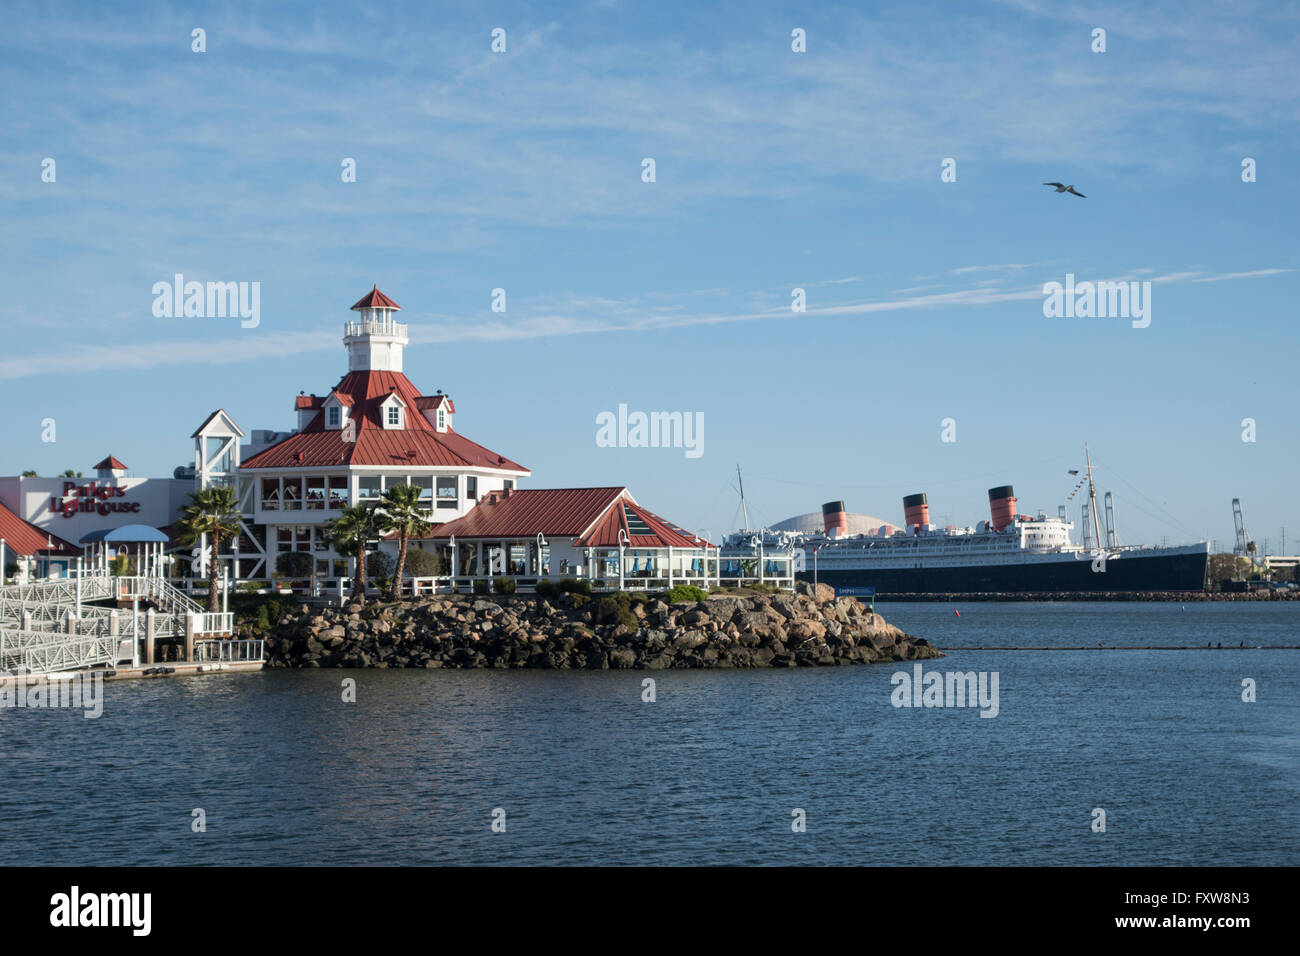 The shoreline village at Longbeach California with the Queen Mary liner in the background Stock Photo